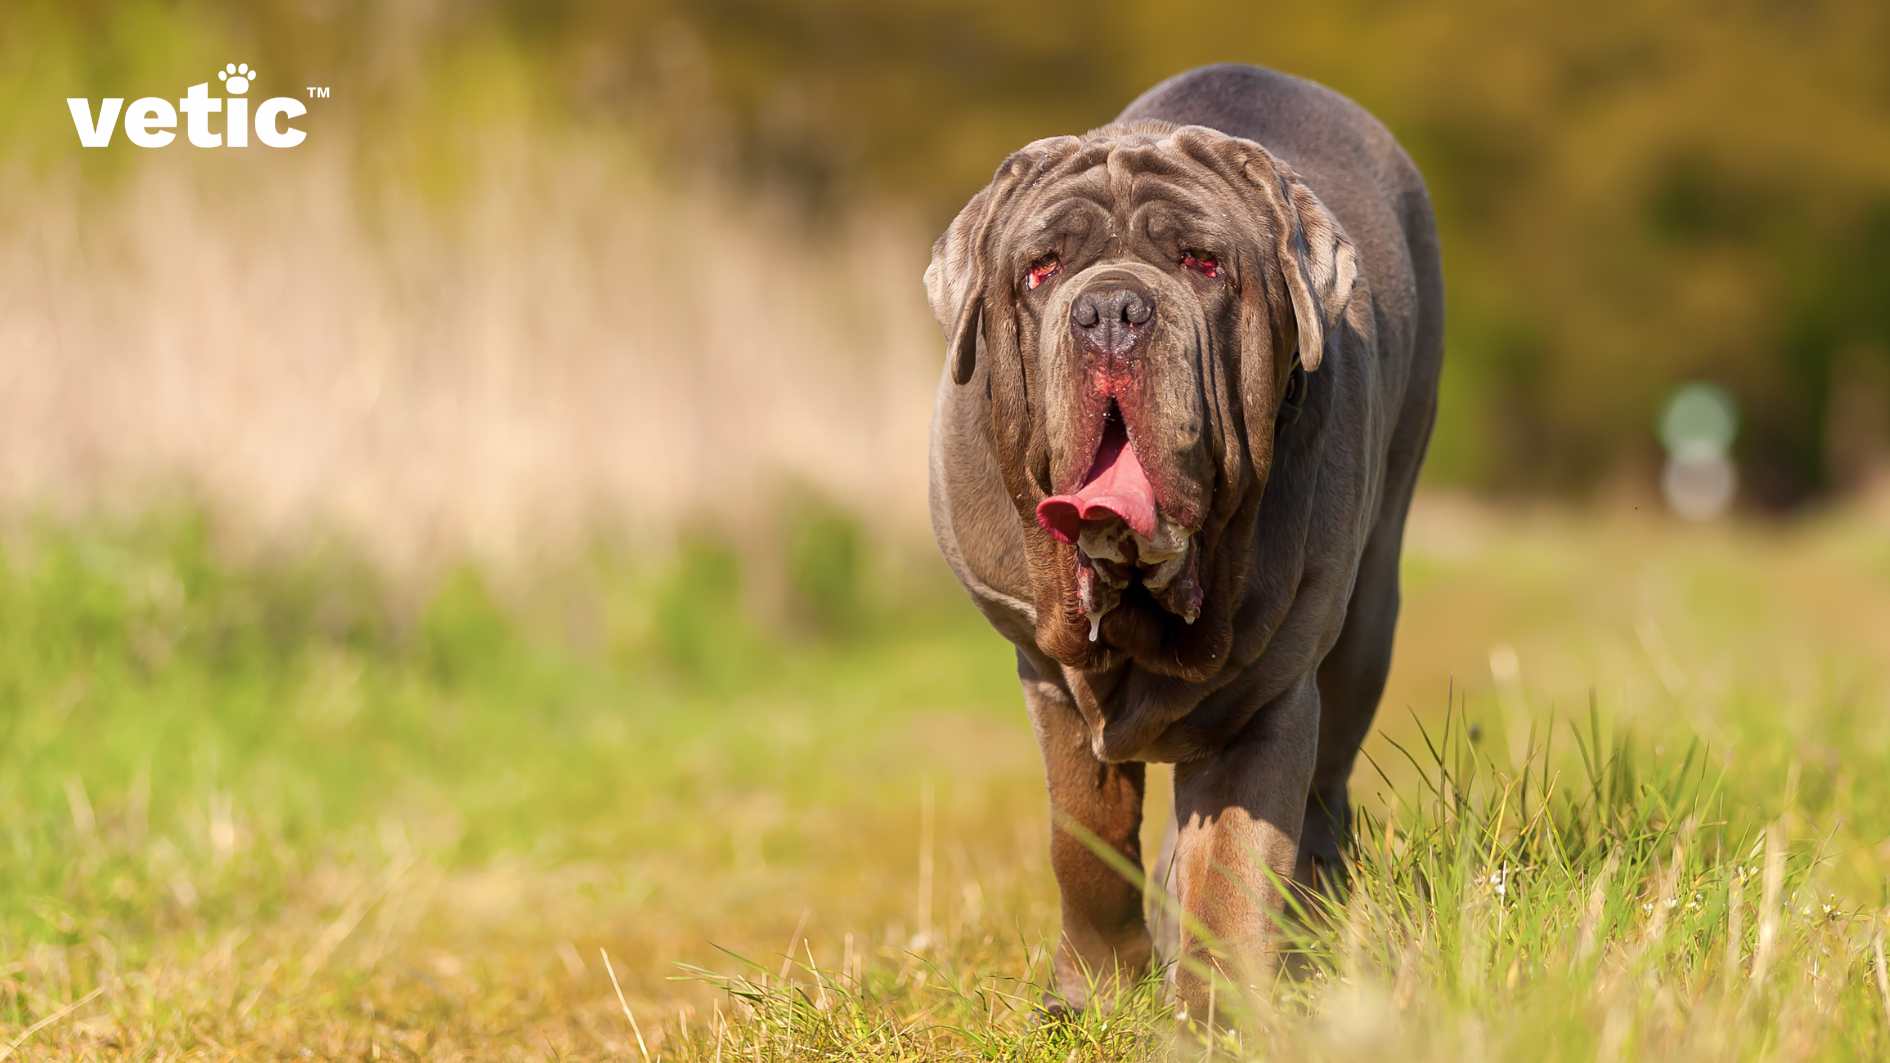 This photo shows a large, adult Neapolitan Mastiff with wrinkled skin and a hanging tongue walking on a grassy terrain. The dog looks energetic and curious, as it approaches the camera. The photo also has the logo “vetic” in the top left corner, which could be the name of a company or a product related to the dog or the photo. The photo has a natural and dynamic quality, with the tall grass and the trees creating a scenic background for the dog. The photo captures the dog’s strength and character, if you can give your dog such freedom and space, you might as well adopt a Neapolitan Mastiff in India.